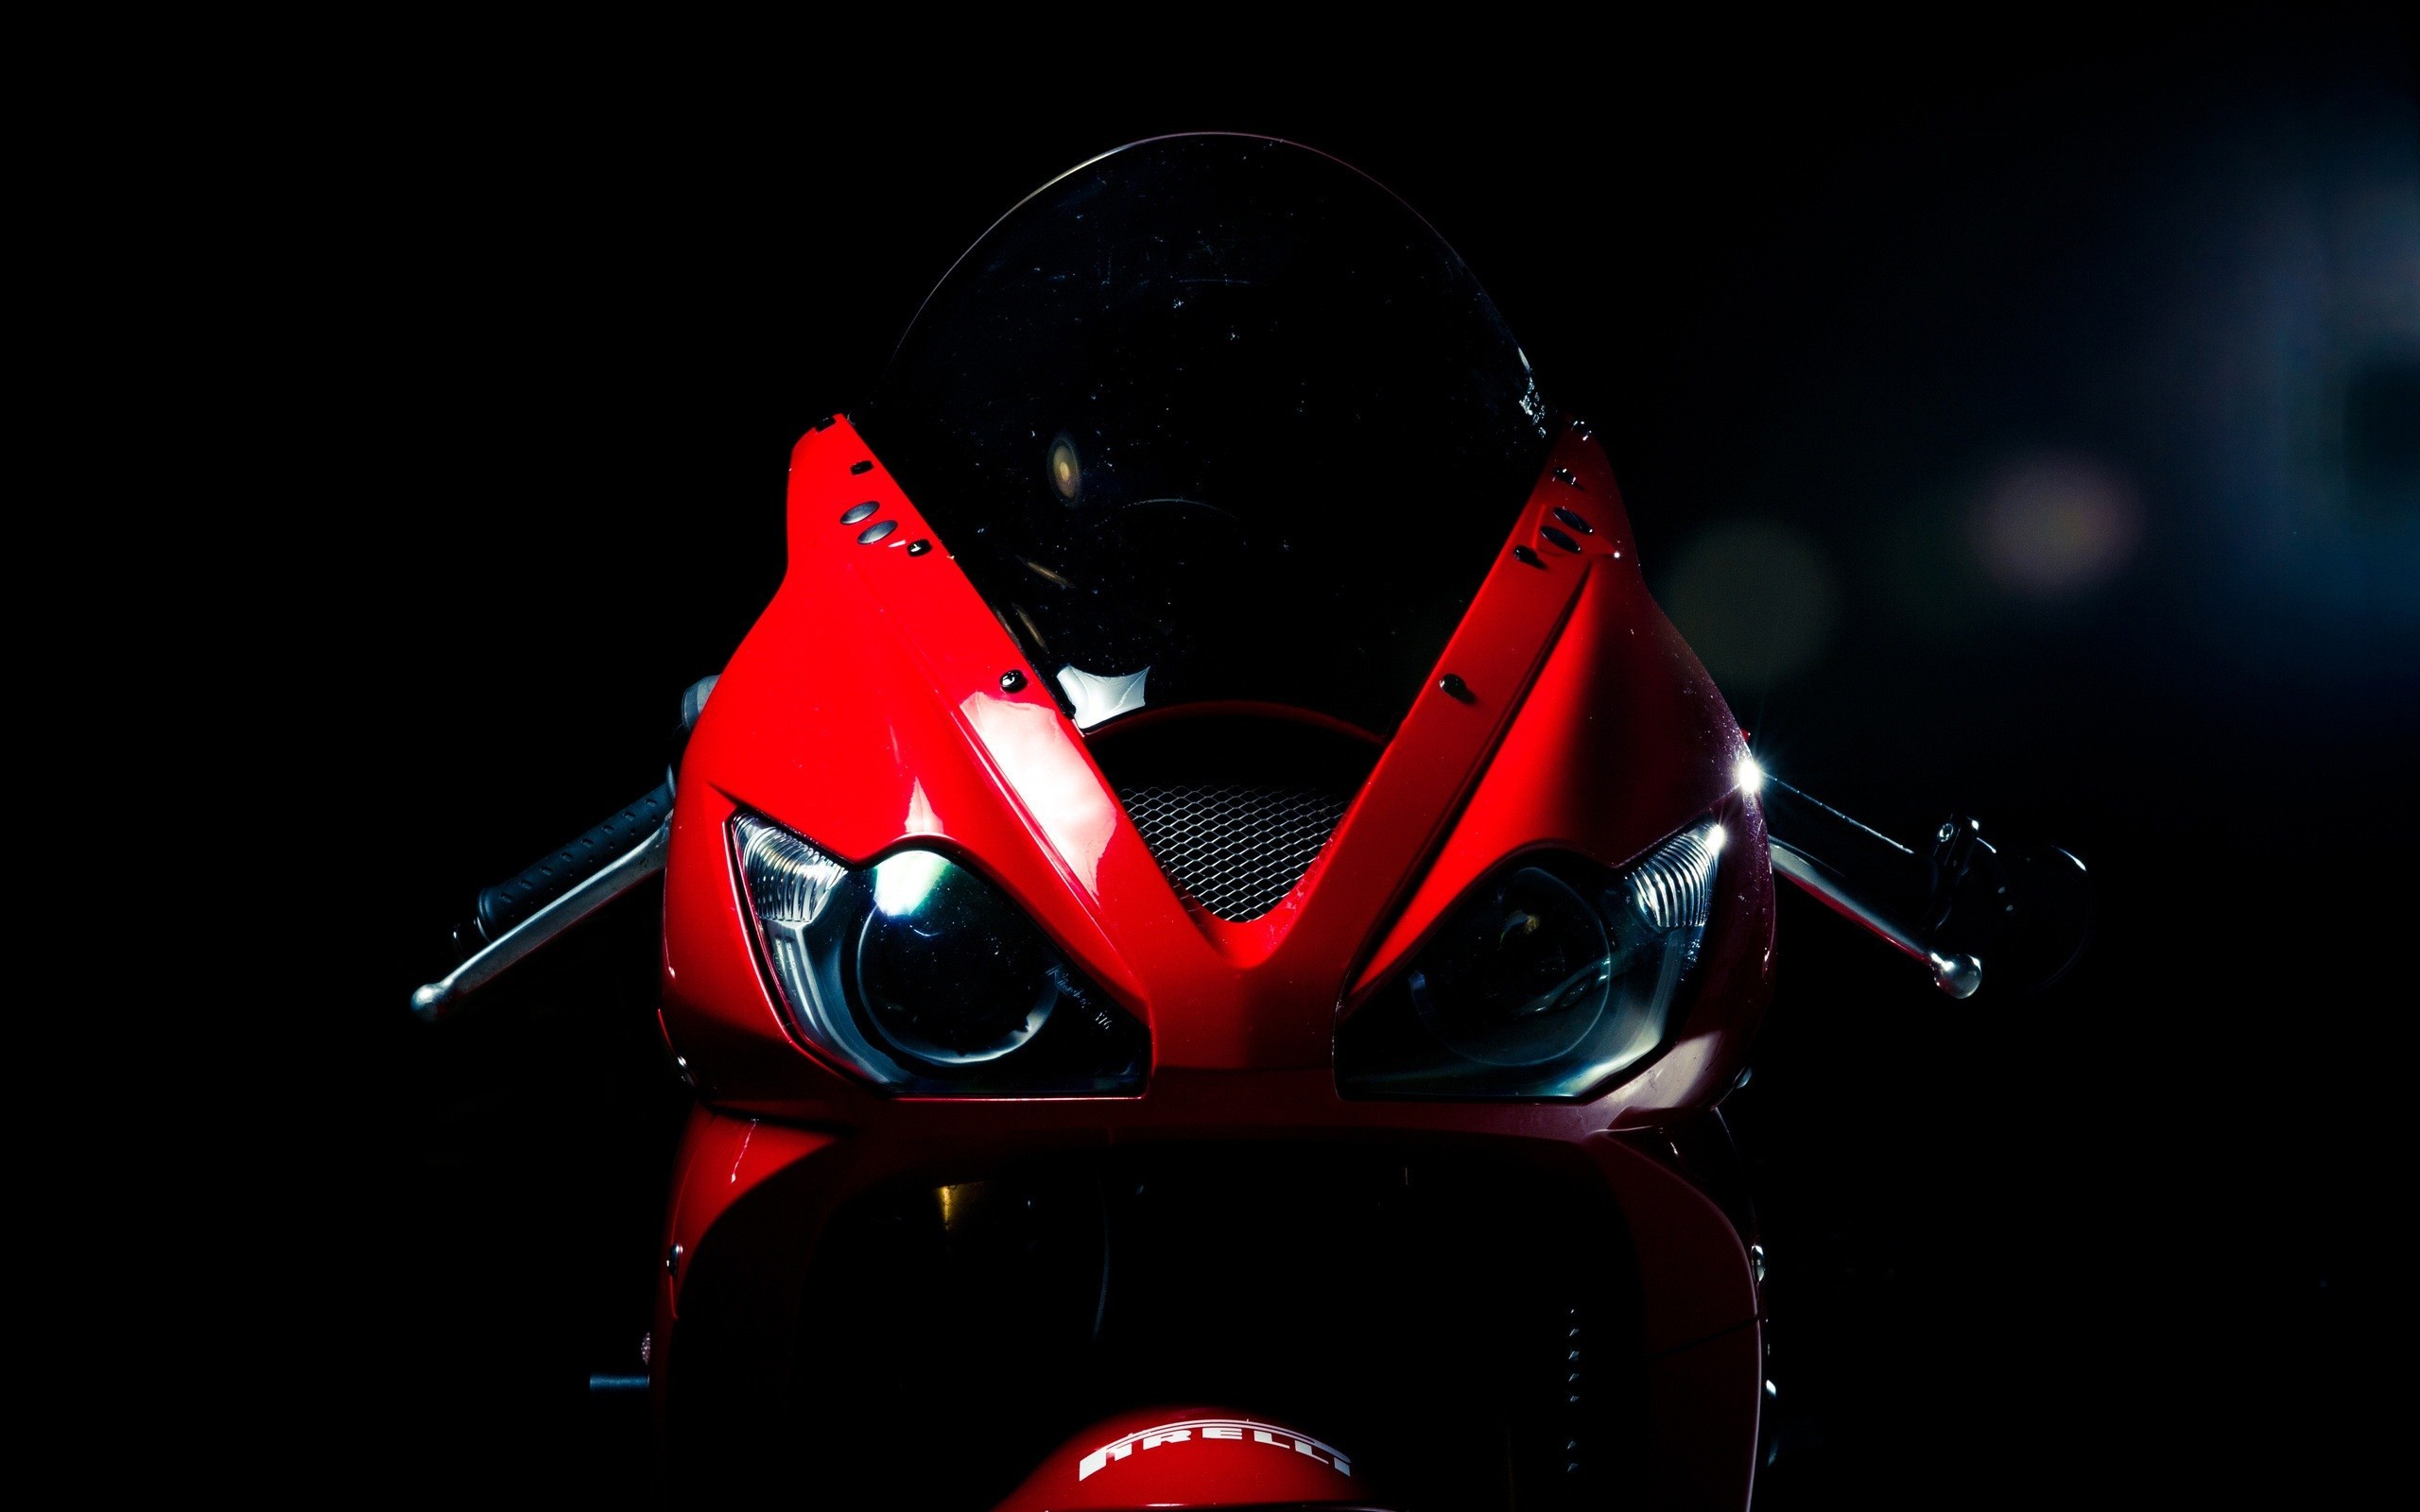 2560x1600 Motorcycle 2560 x 1600 HD Wallpapers